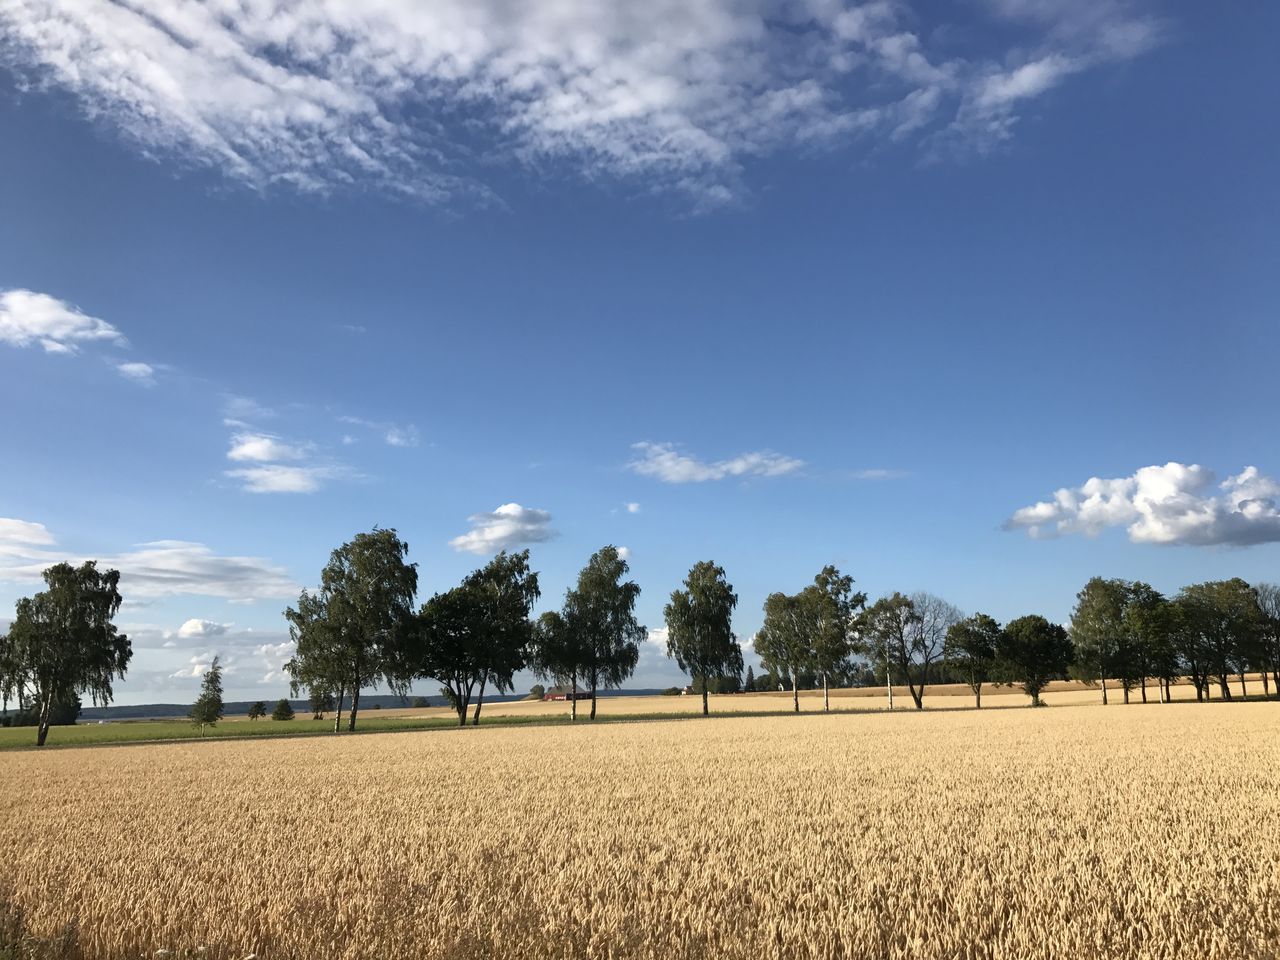 The image shows a wheat field on a sunny autumn day